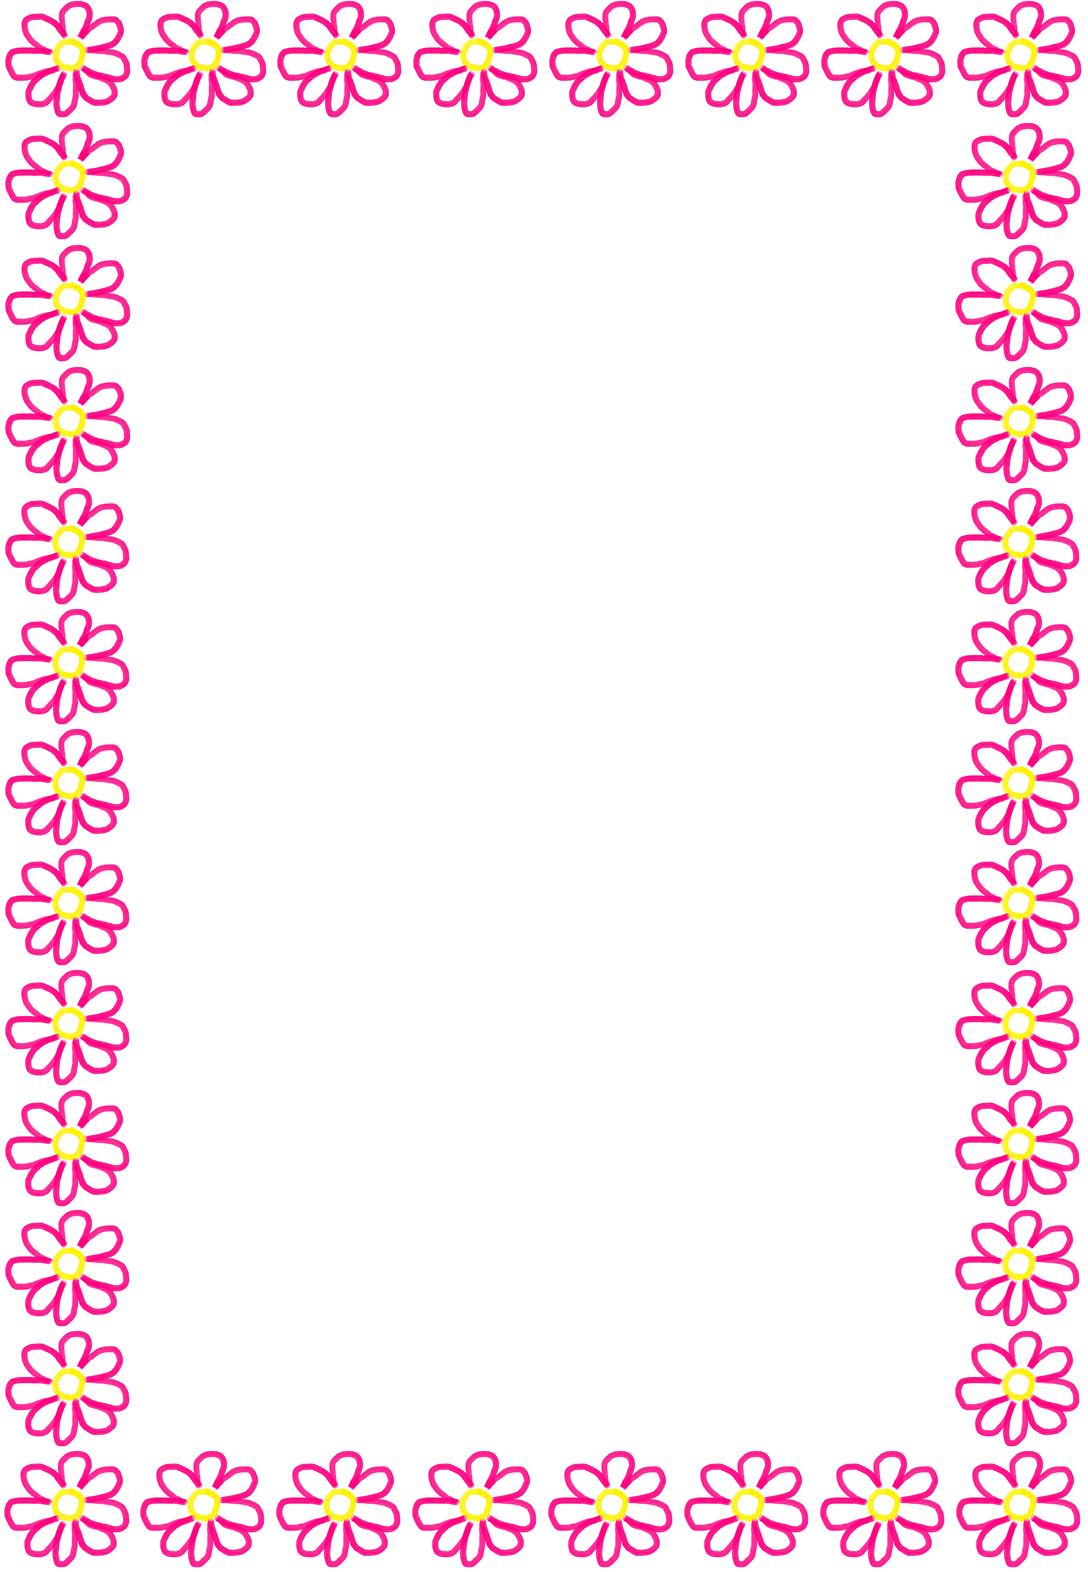 free-pretty-borders-download-free-pretty-borders-png-images-free-cliparts-on-clipart-library